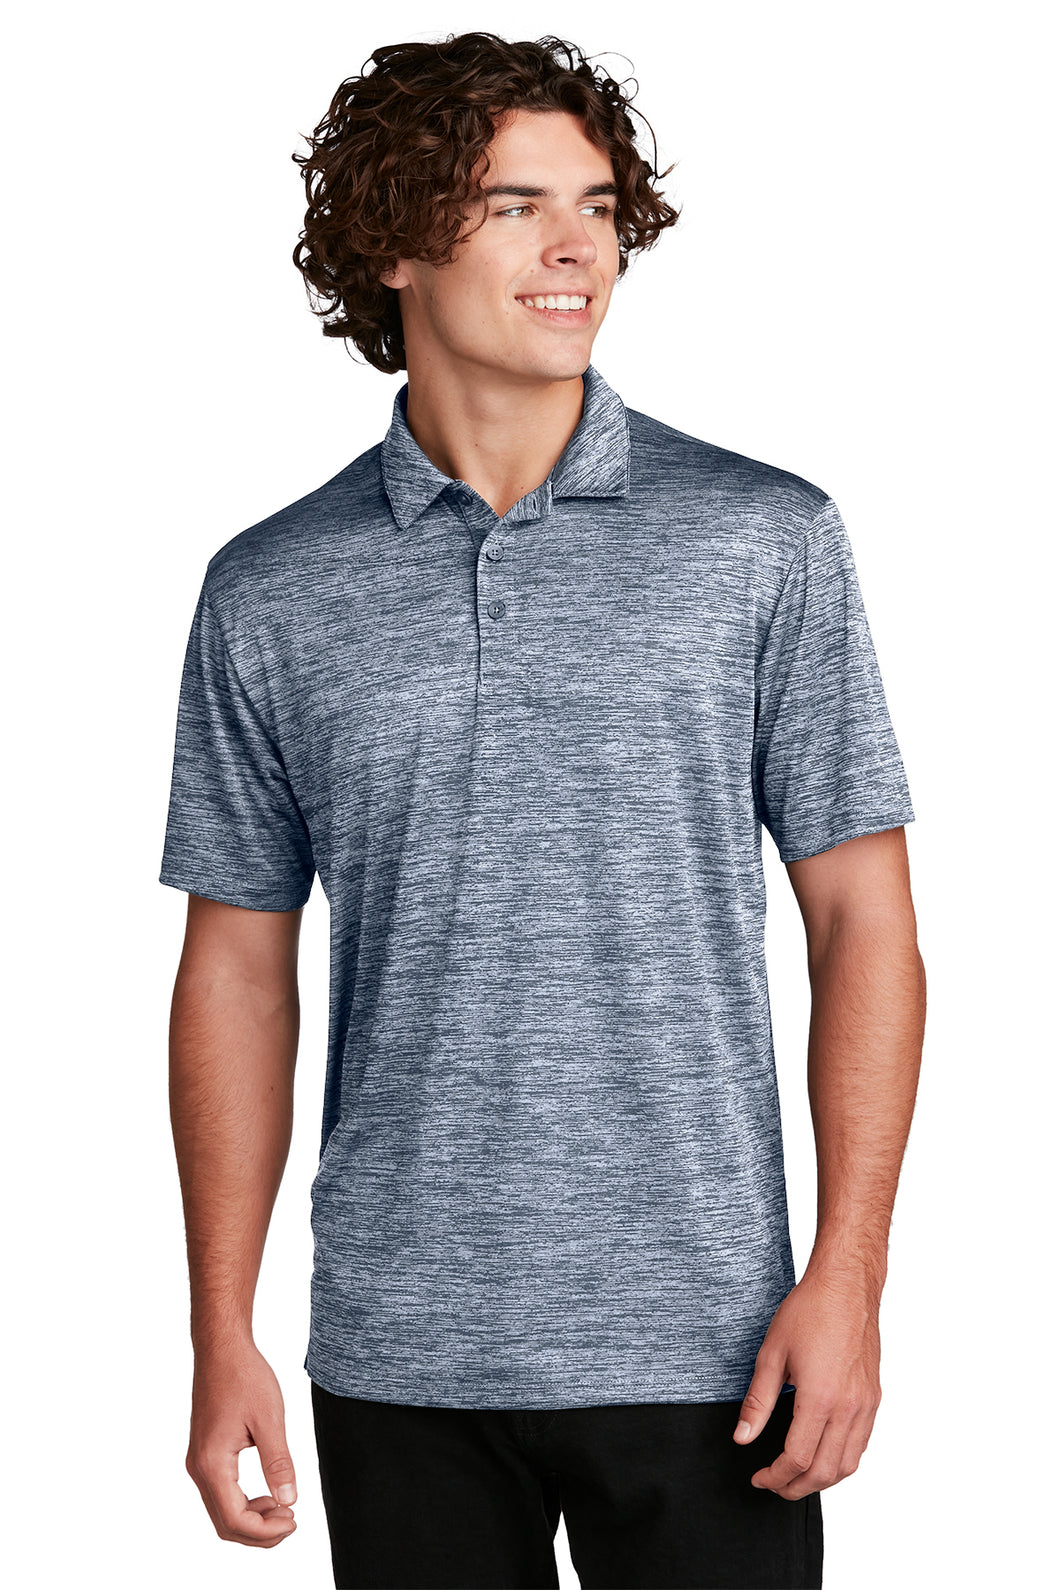 Laser Performance Polo - Navy